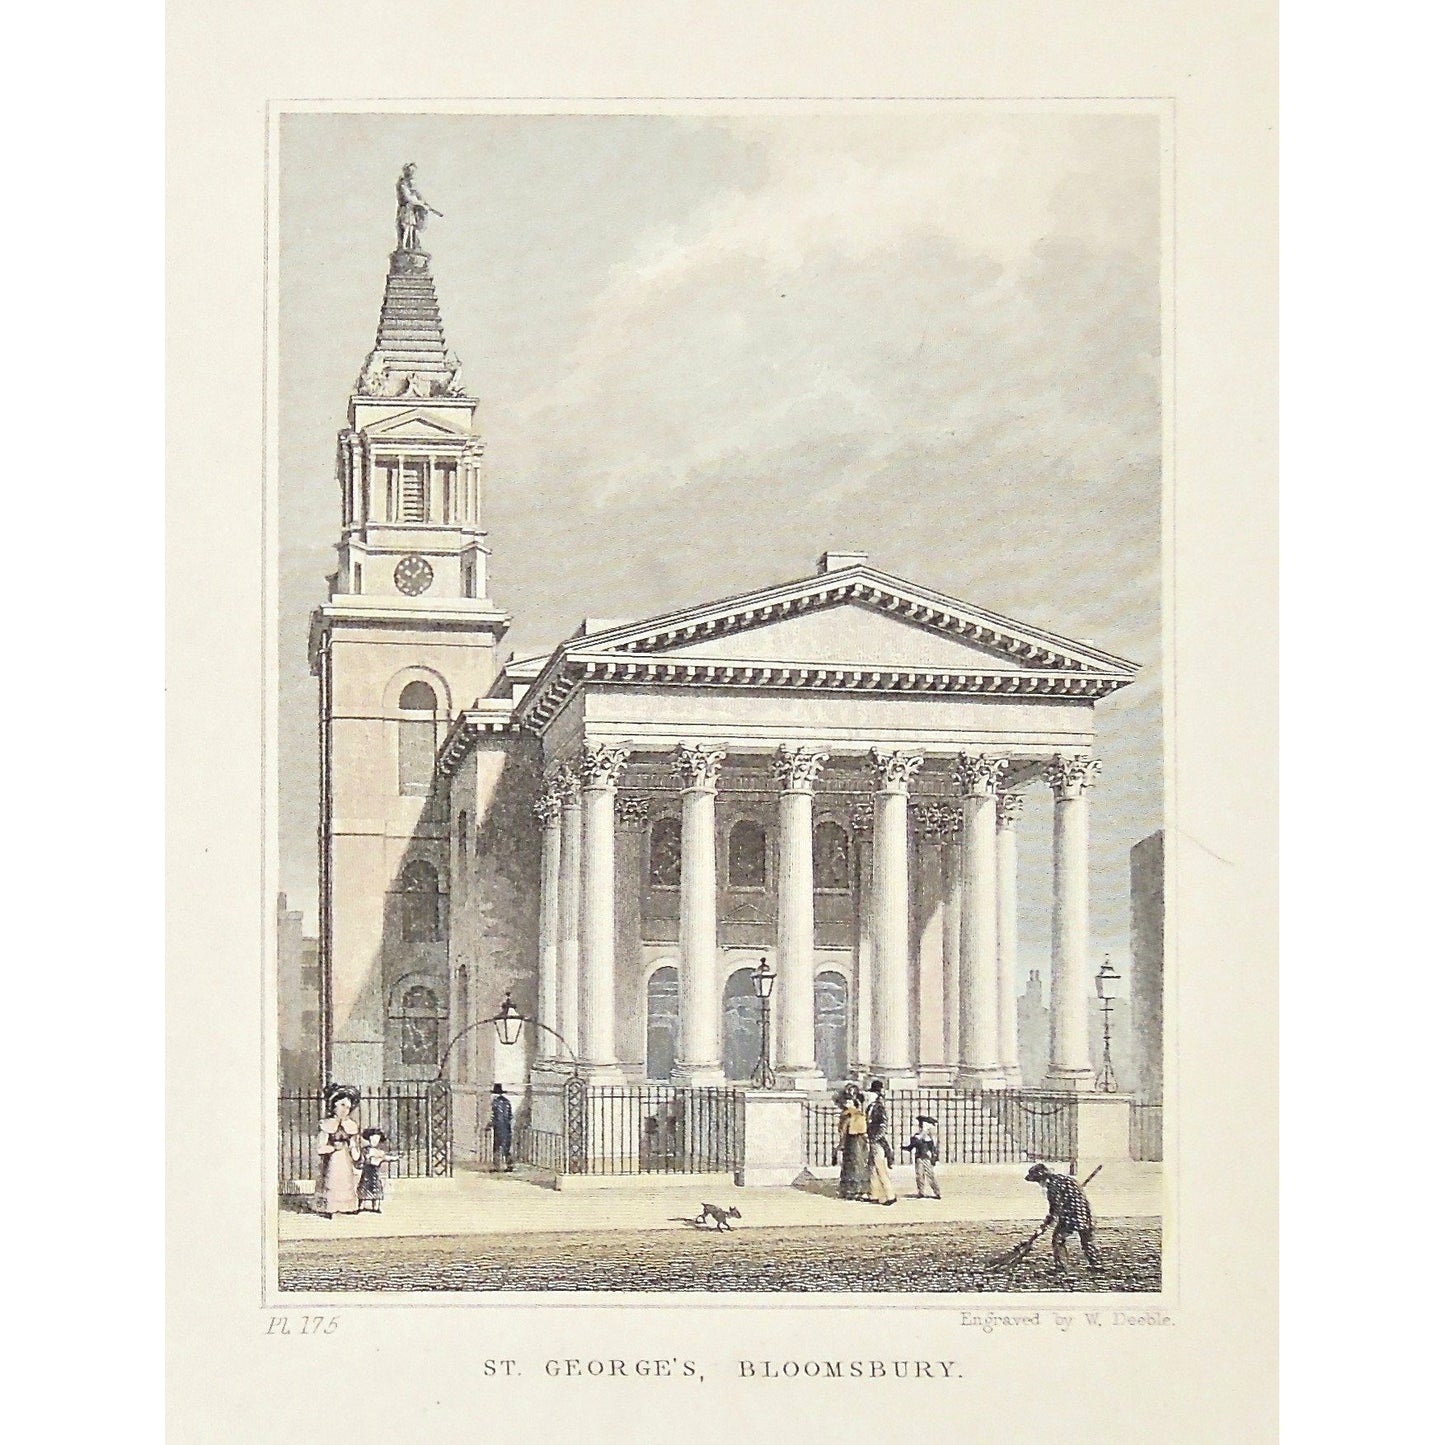 St. George's, Hanover Square.  (S2-52a)